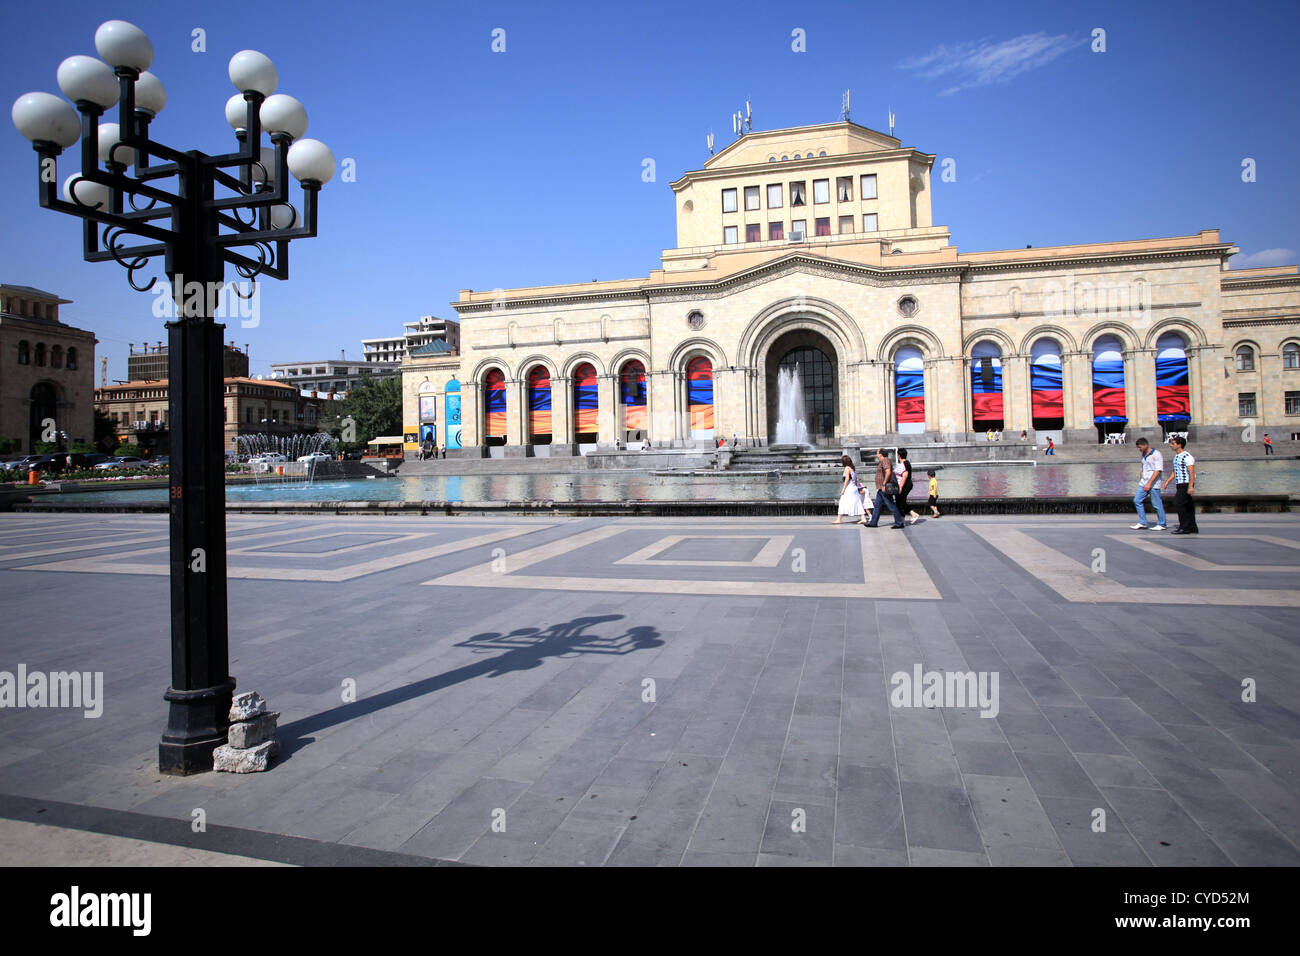 The National Art Gallery Building Stock Photo